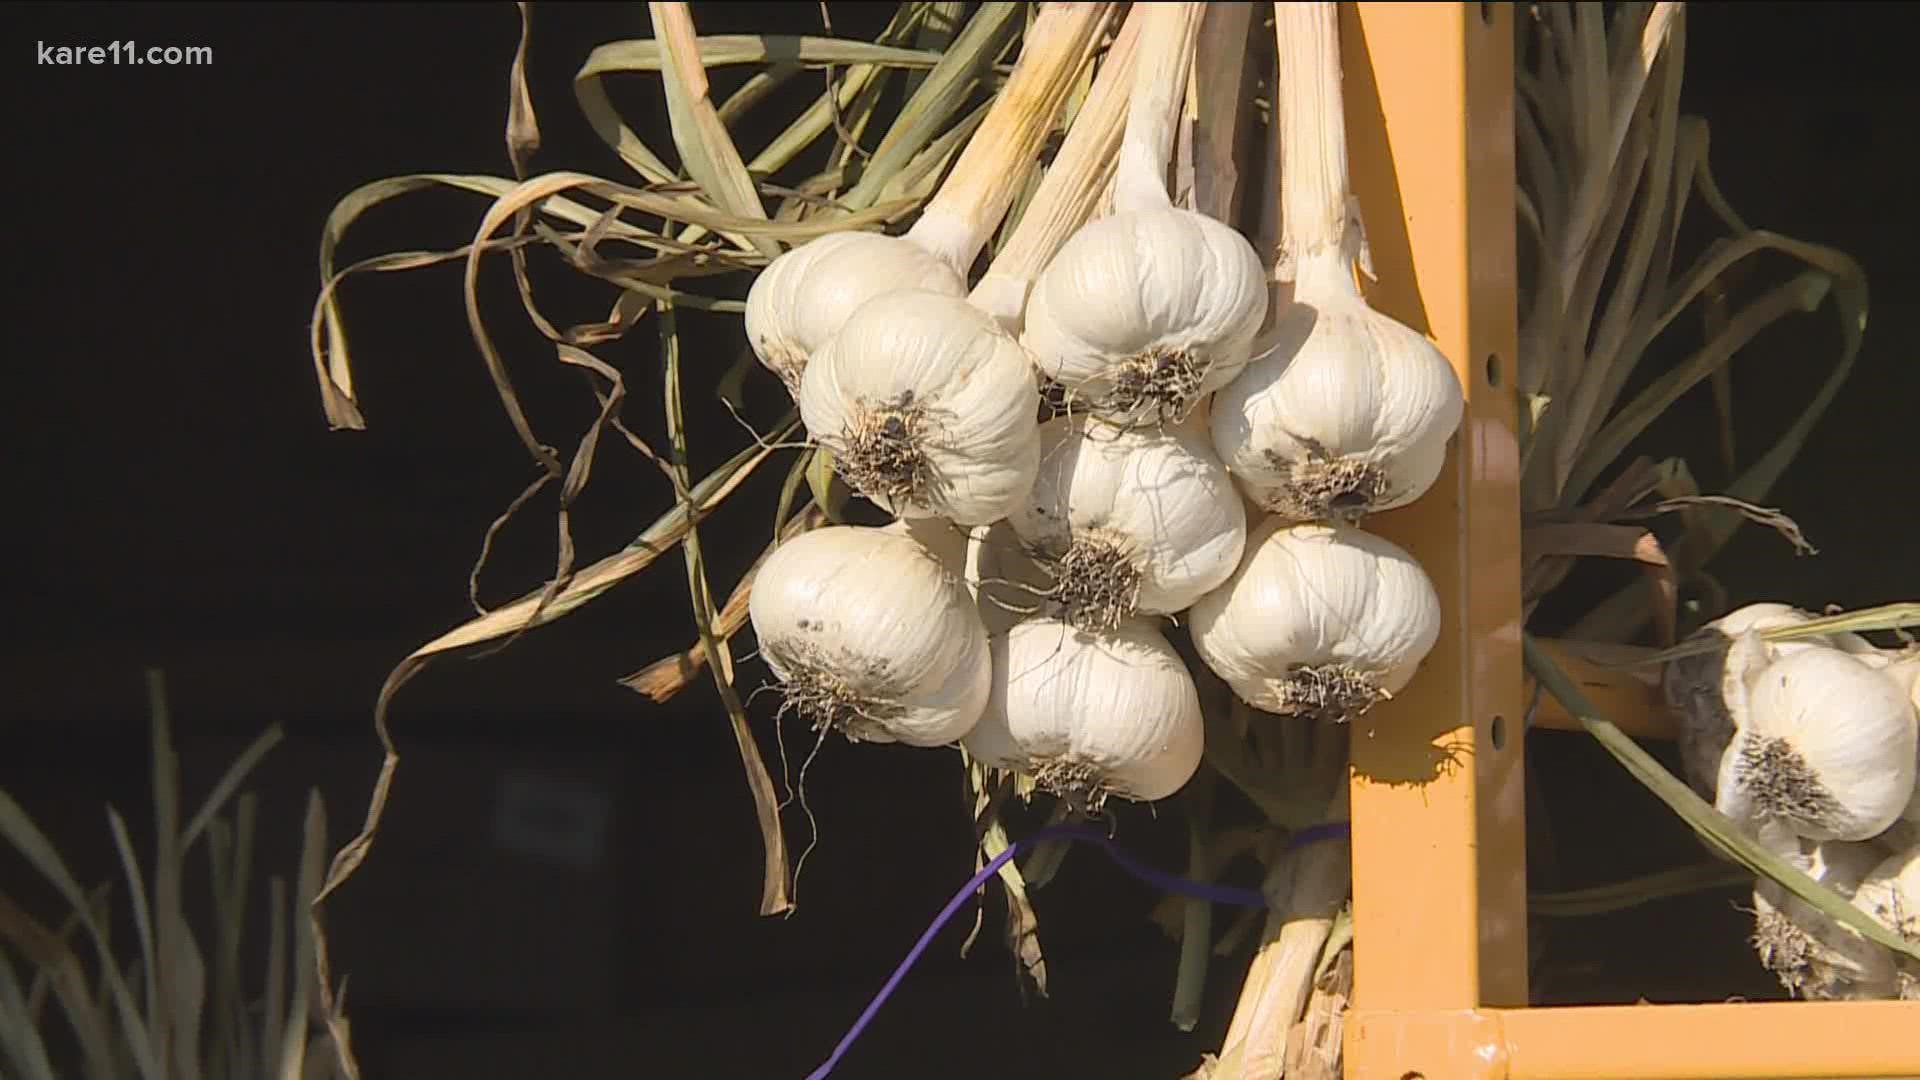 Garlic is well-suited to Minnesota's northern climate, and fall is the time to think about planting it.